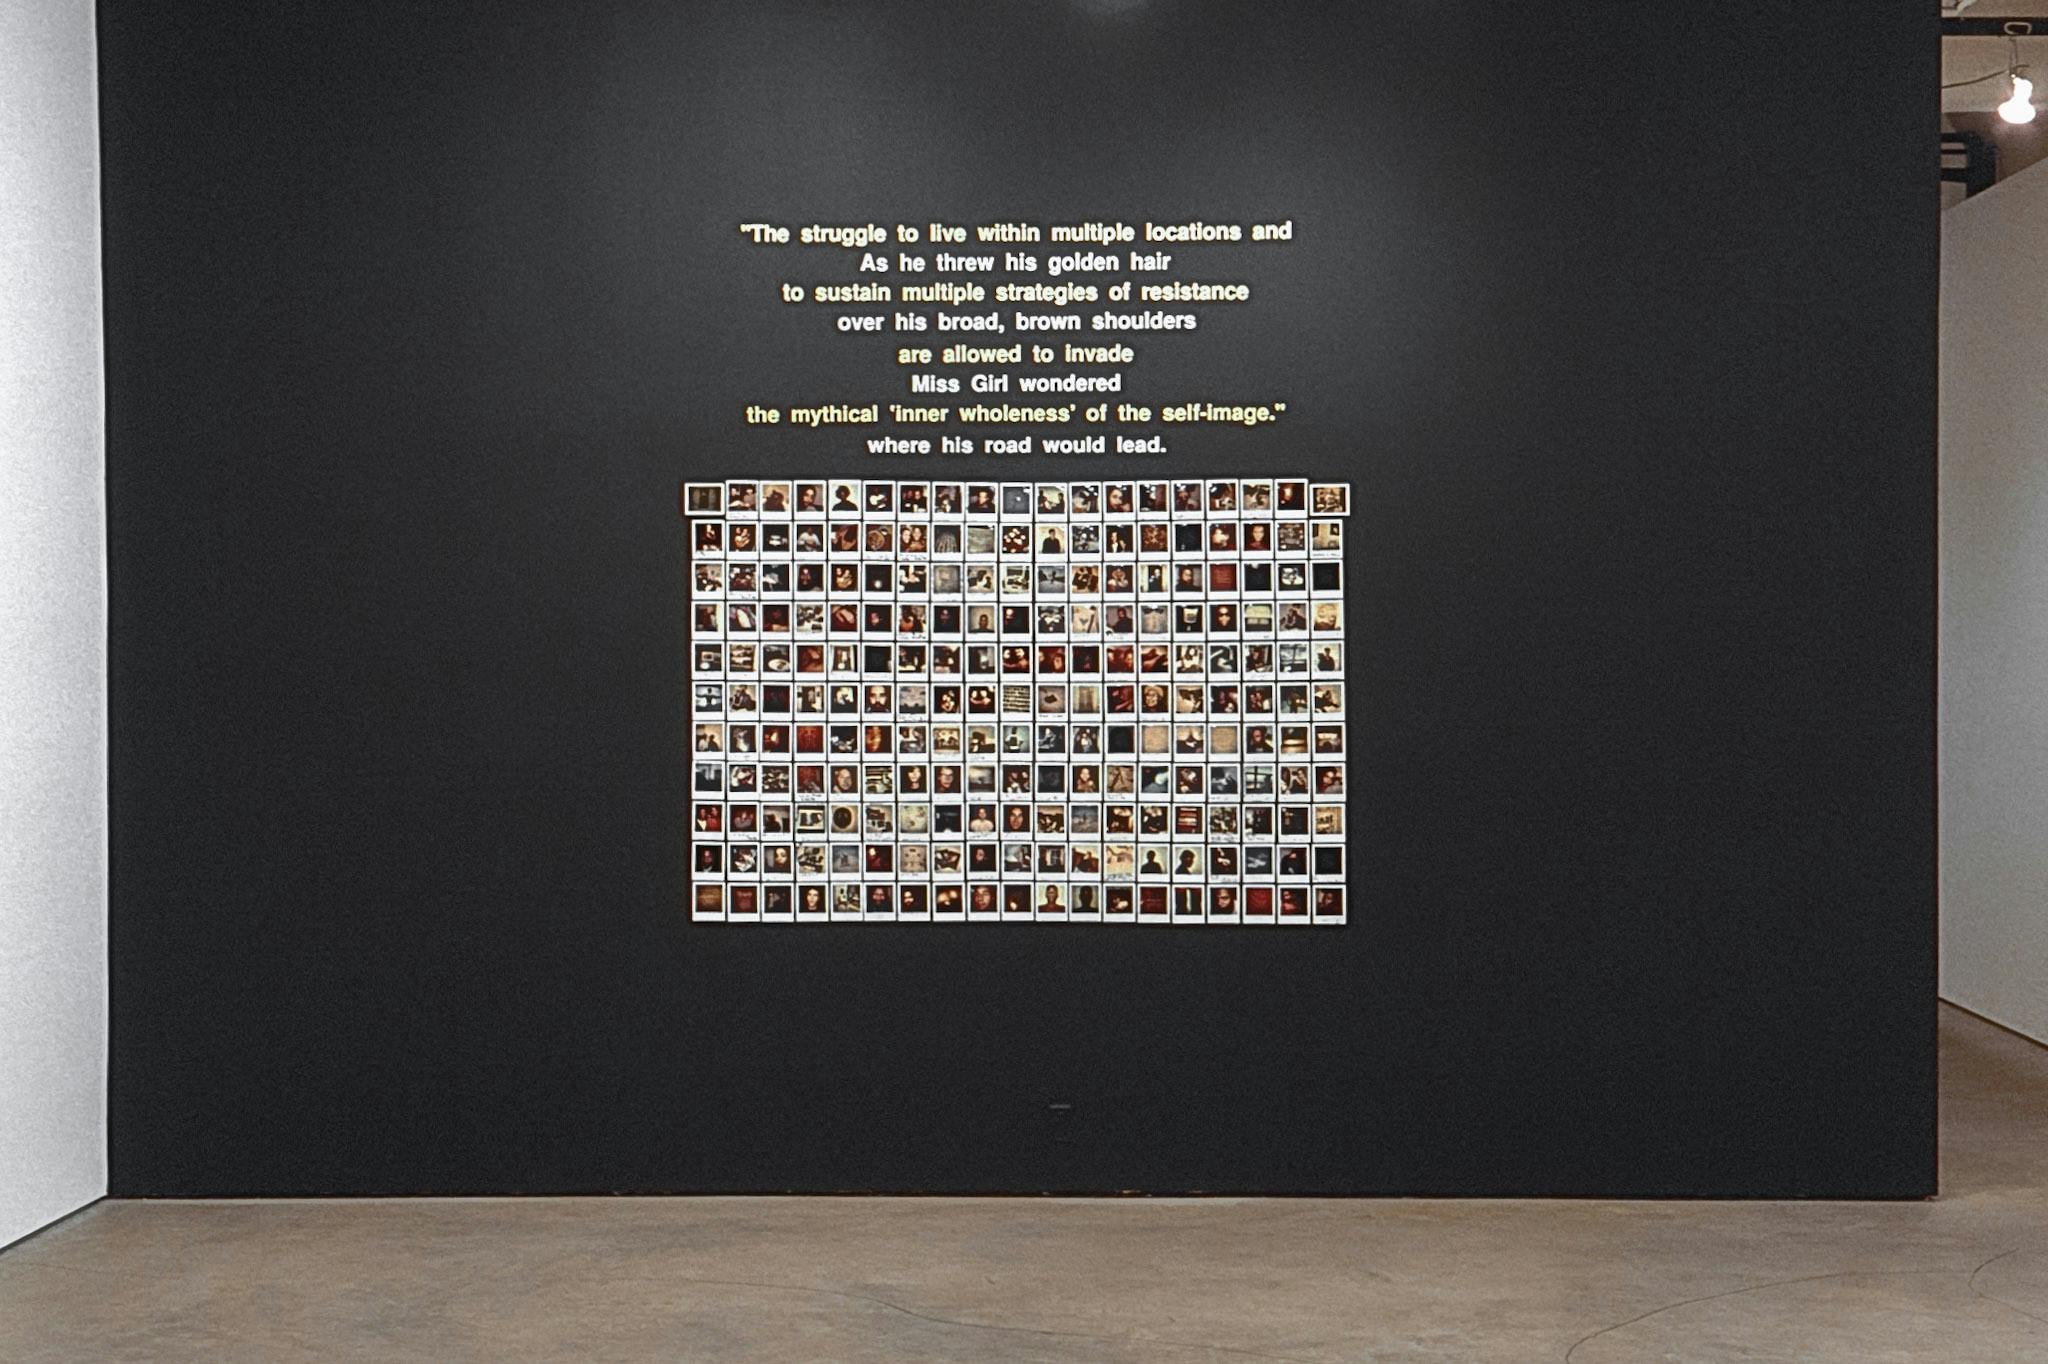 A black wall in a gallery with text and dozens of Polaroid photos. The text is composed of two different excerpts alternating, one in yellow and one in white, intertwining in a disorienting way.